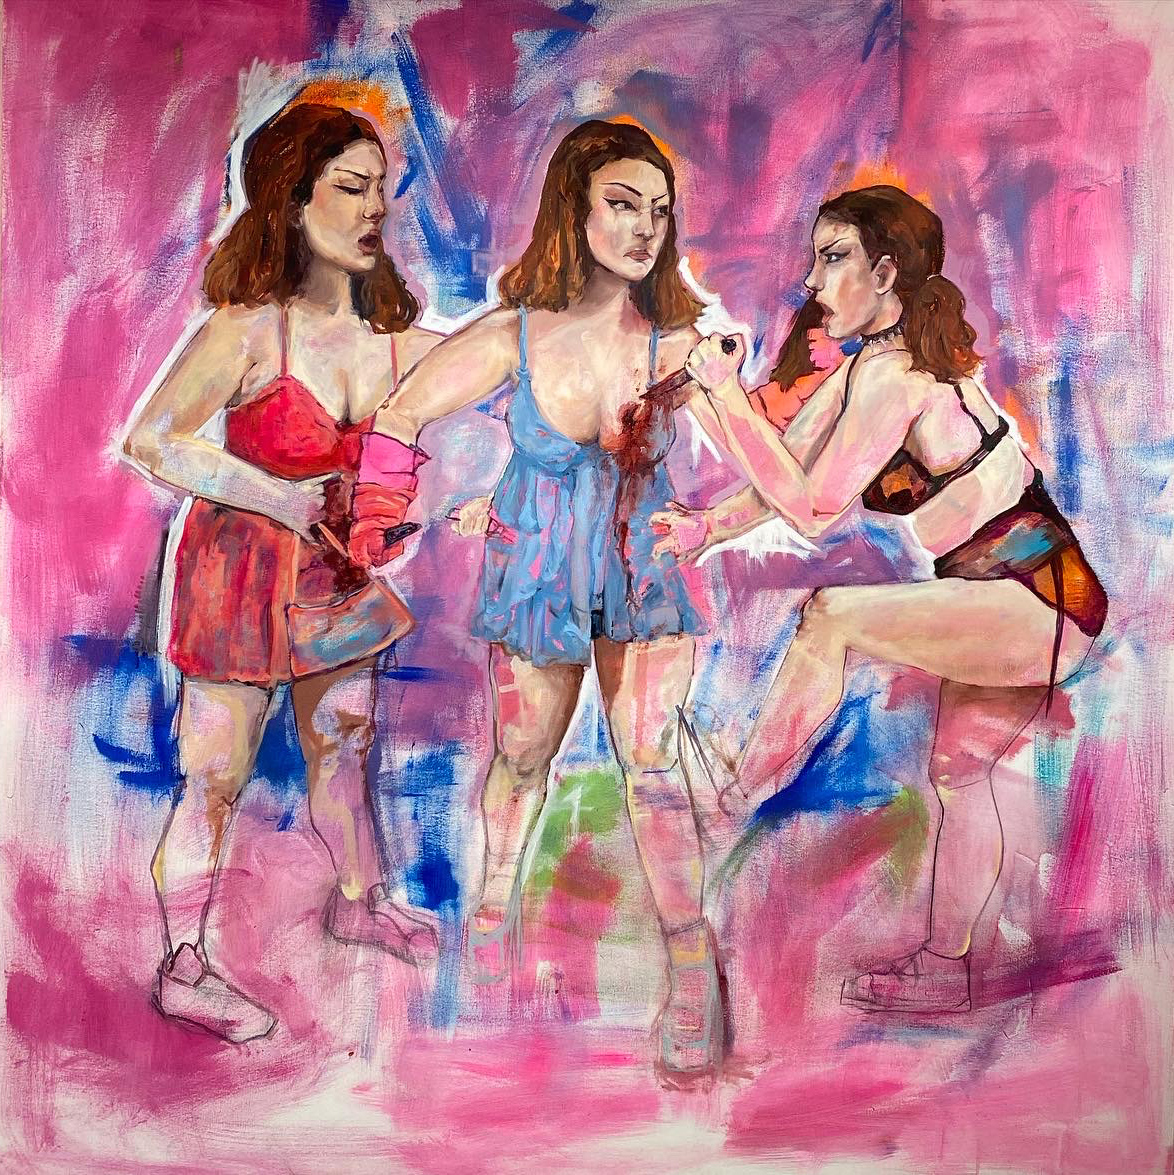 Painting of three people in lingerie with an abstract background